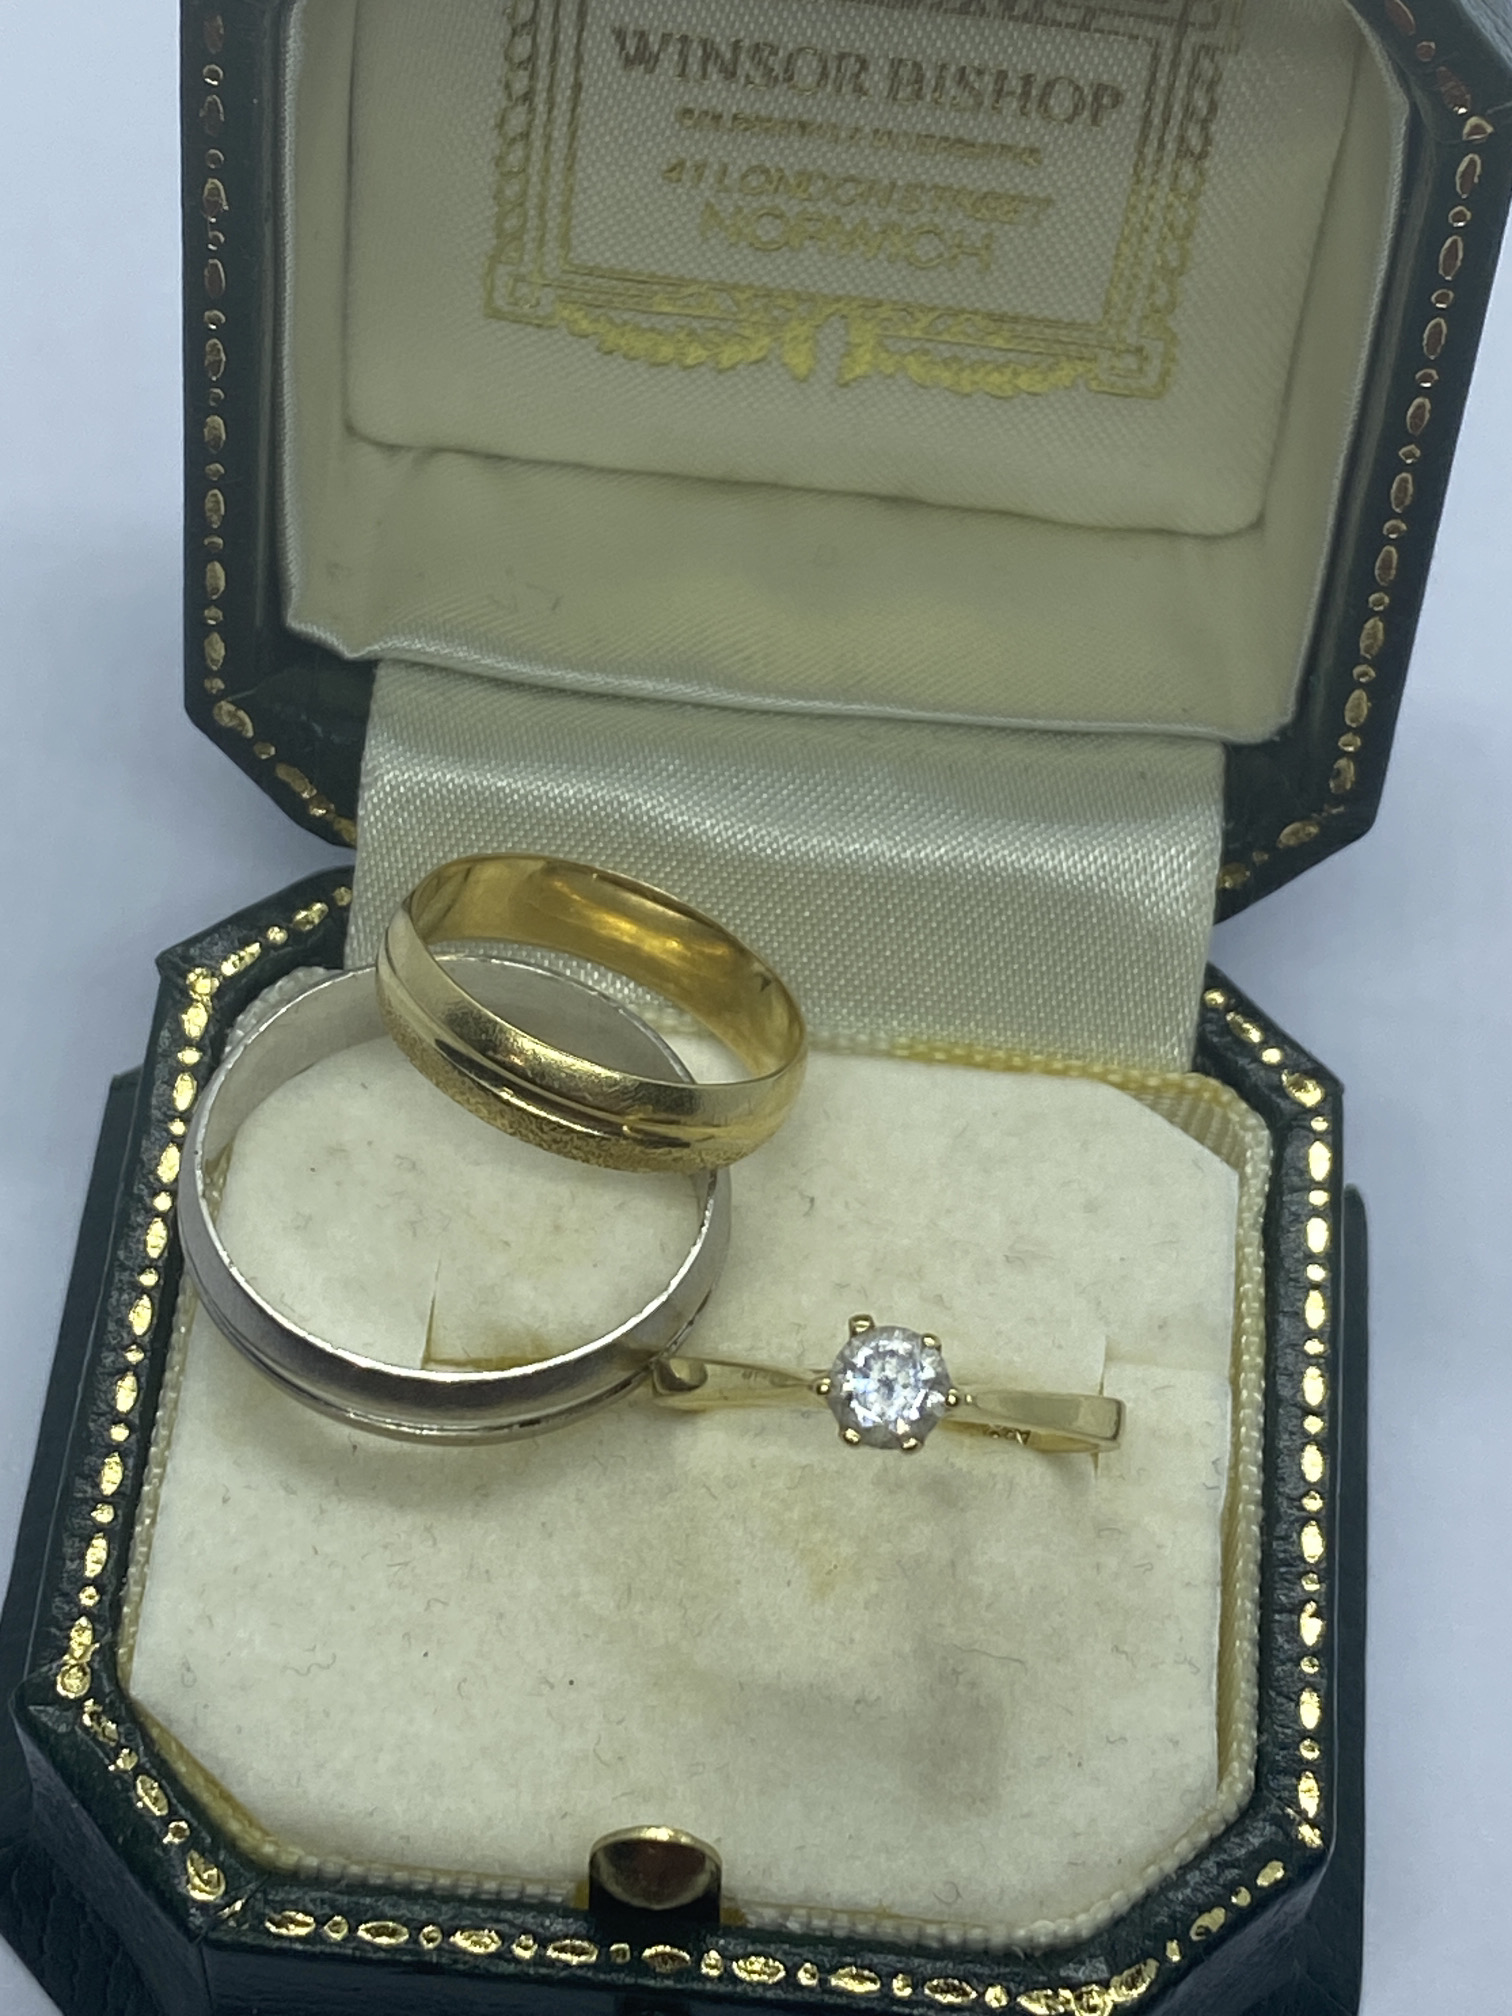 18ct GOLD APPROX 0.50ct DIAMOND SOLITAIRE RING WITH 2 x RINGS TESTED AS 18ct GOLD - 9.25grams WEIGHT - Image 2 of 3